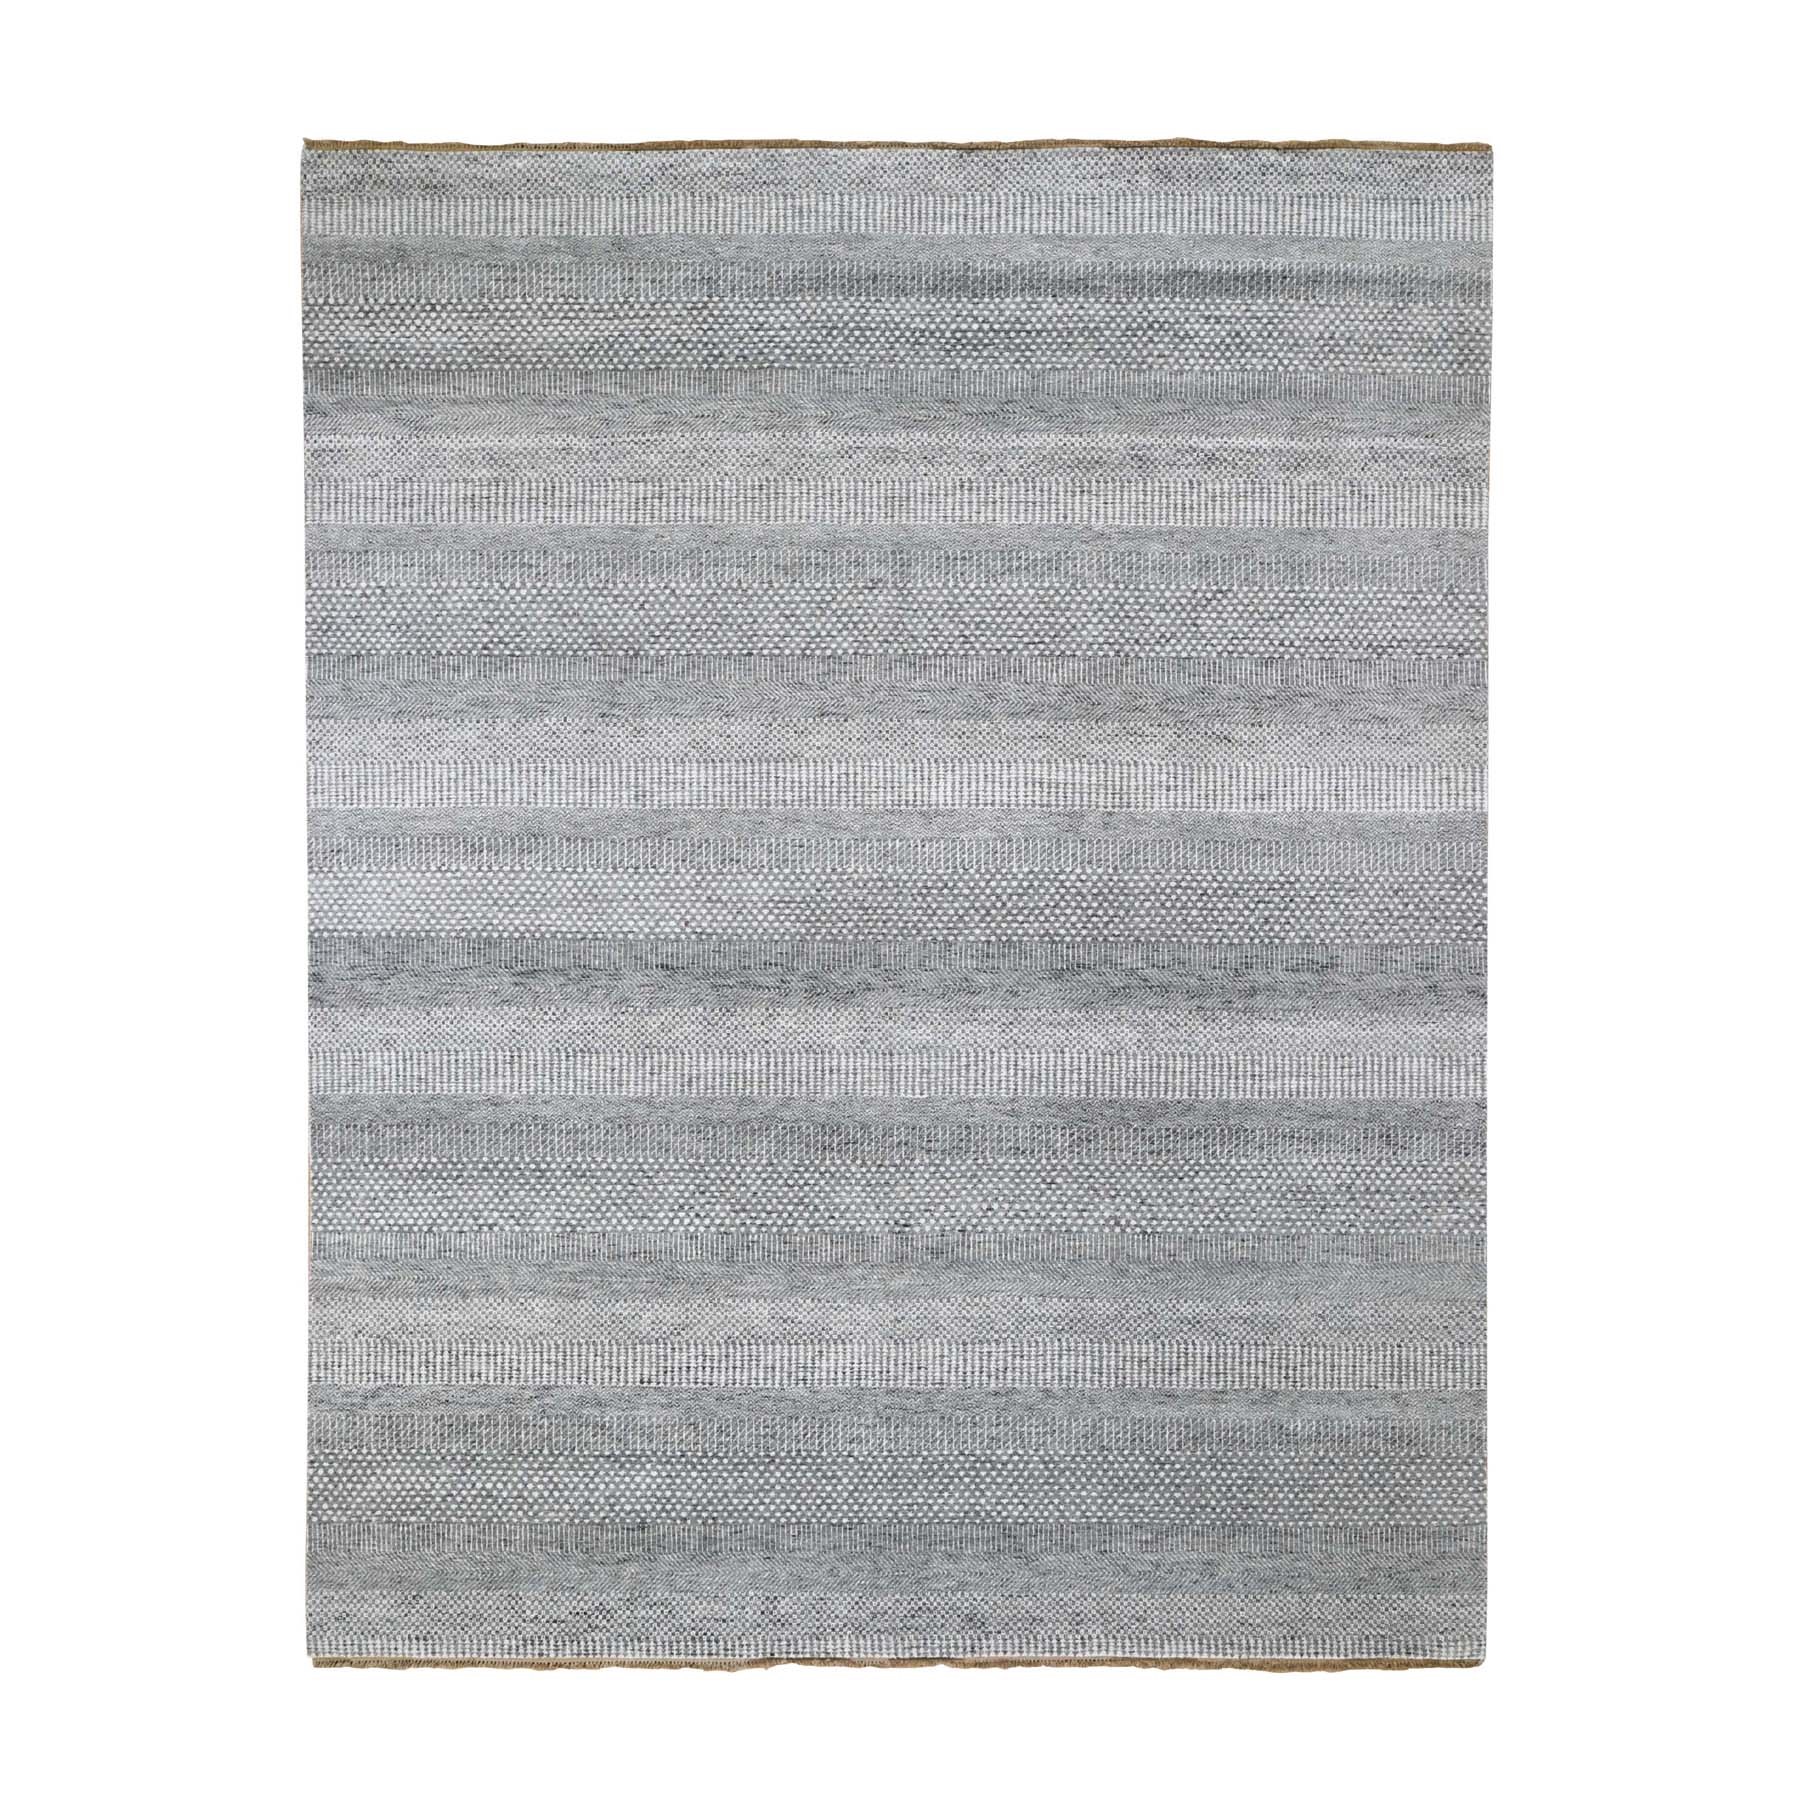 8-1 x10-2  Gray Undyed Natural Wool Grass Design Hand Knotted Oriental Rug 